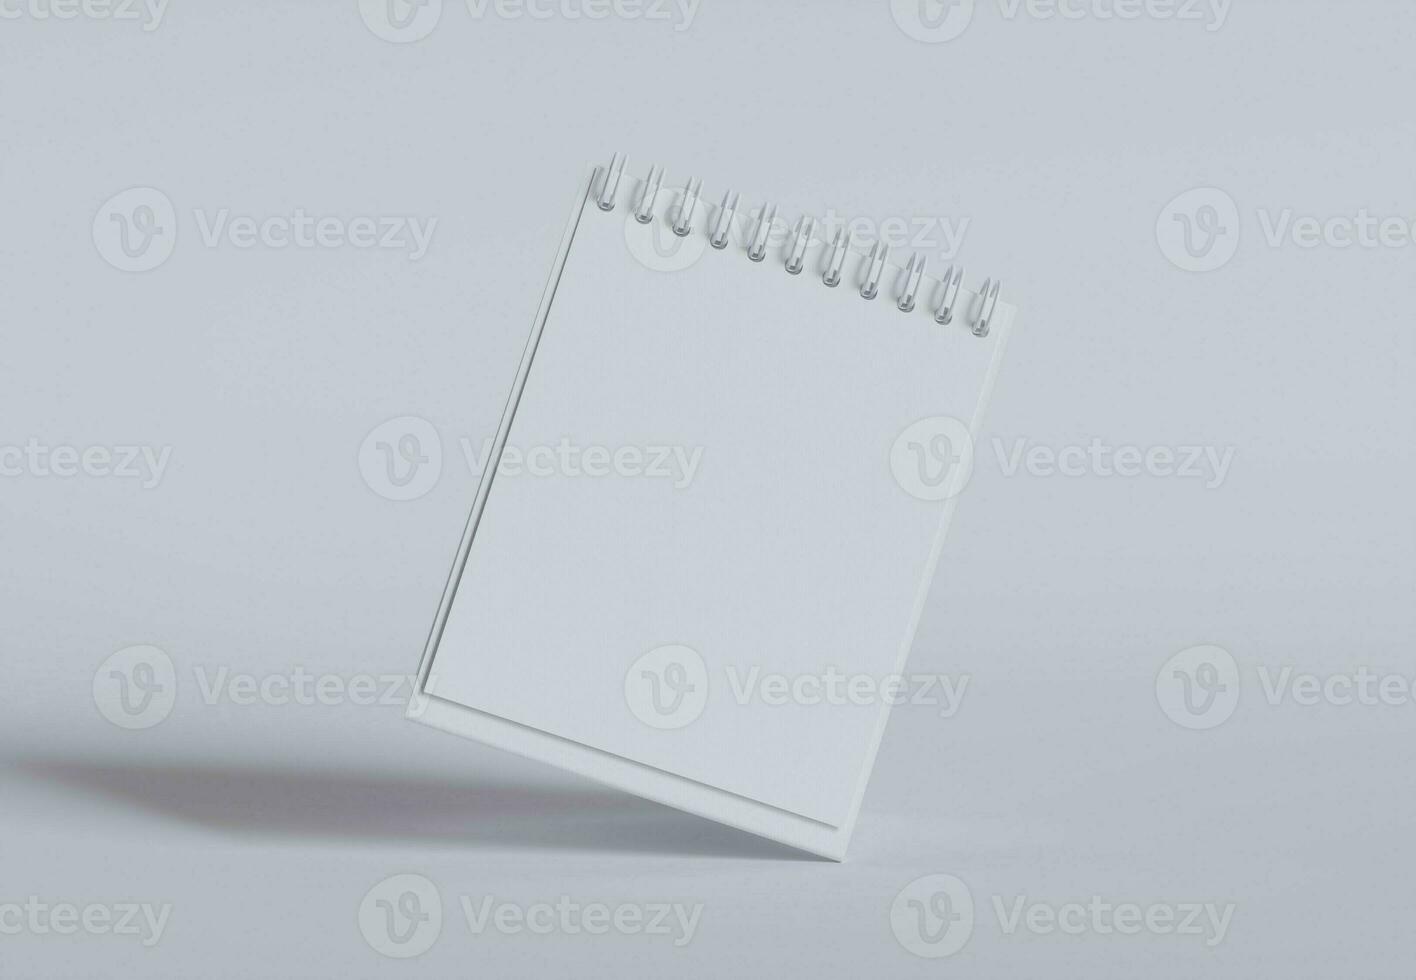 Desk Calender white color and realistic textures photo